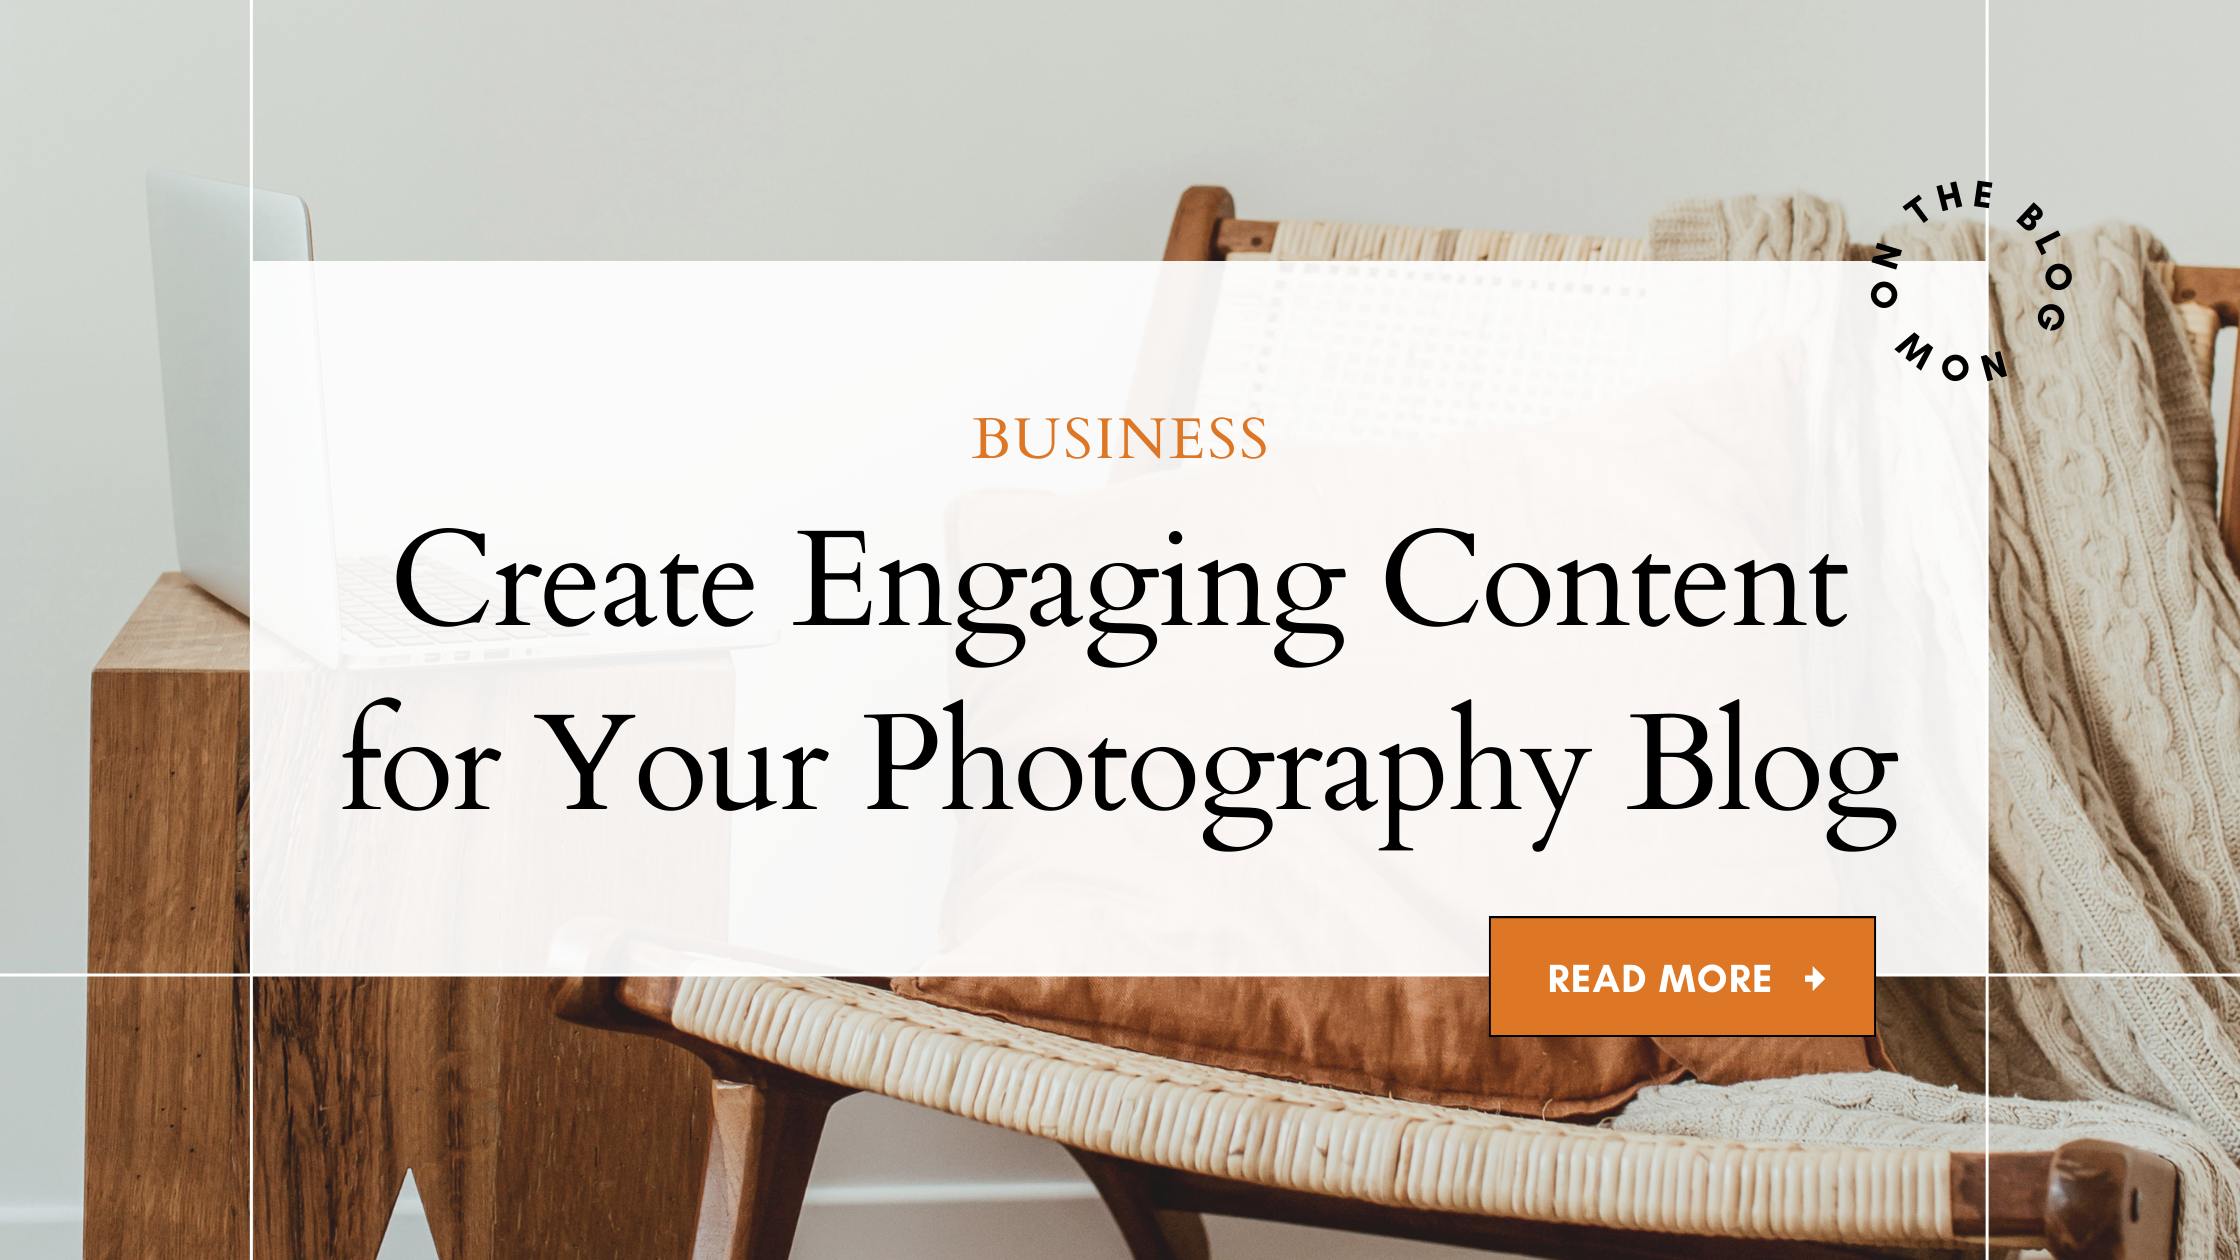 Blogging tips for photographers